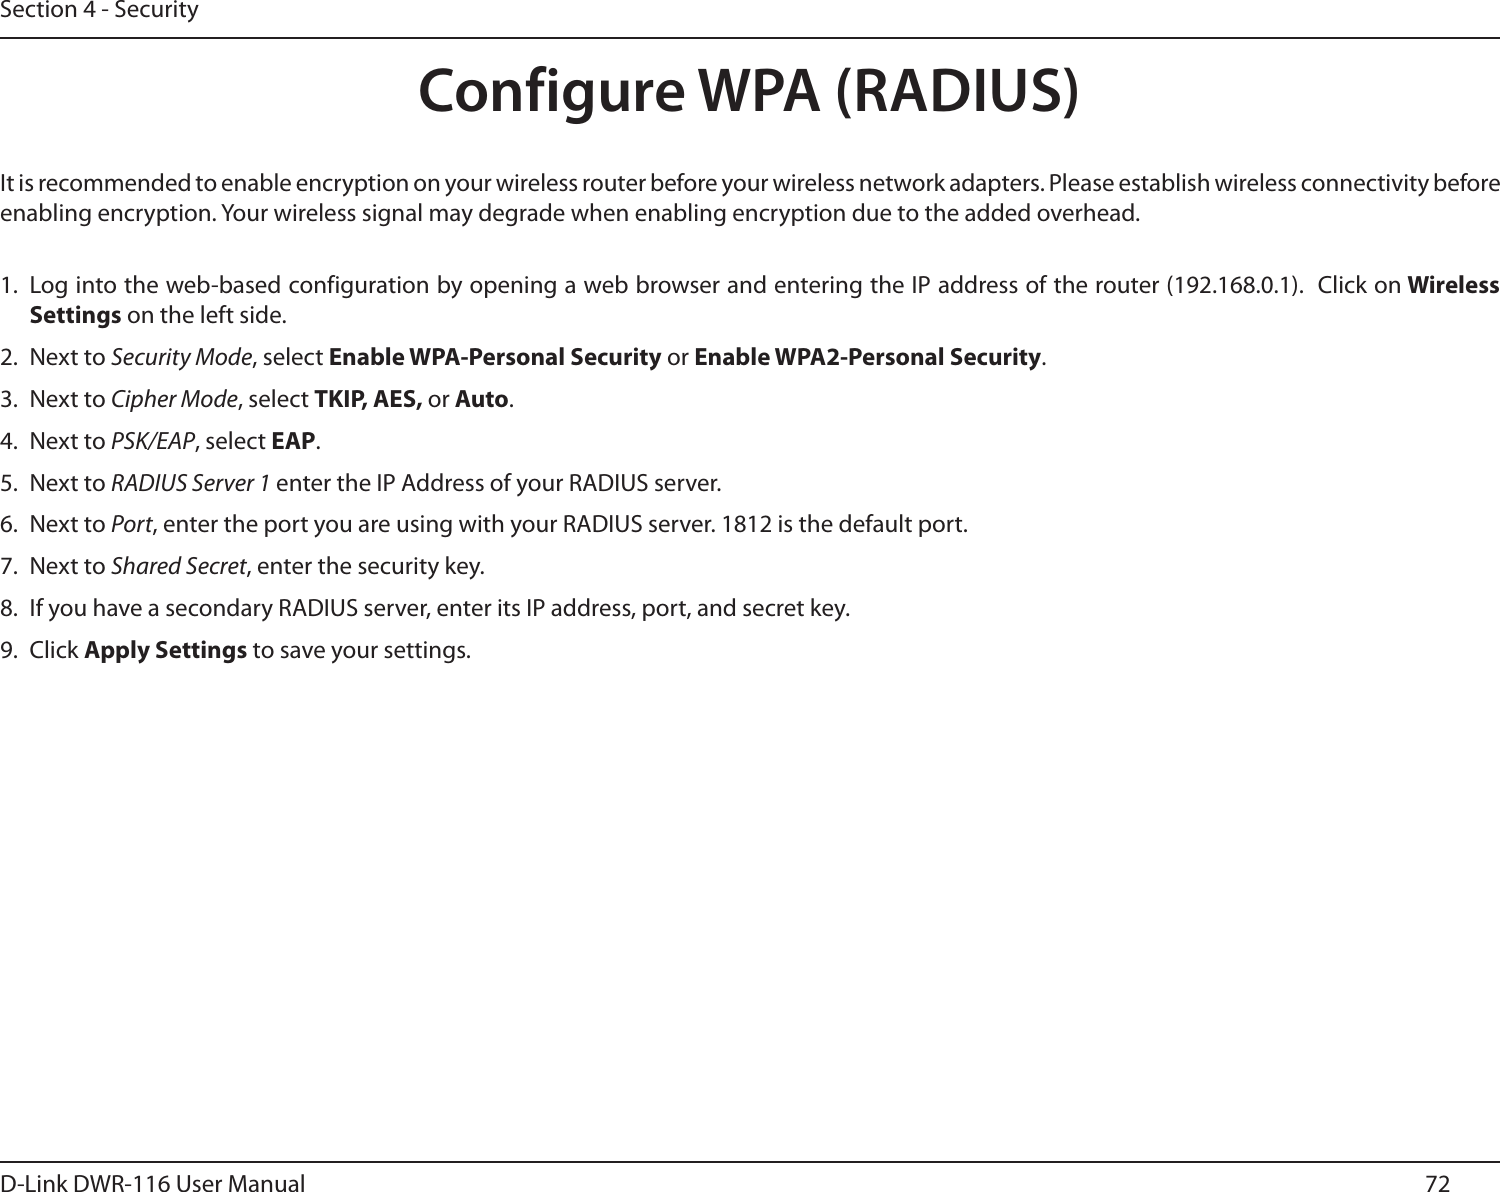 72D-Link DWR-116 User ManualSection 4 - SecurityConfigure WPA (RADIUS)It is recommended to enable encryption on your wireless router before your wireless network adapters. Please establish wireless connectivity before enabling encryption. Your wireless signal may degrade when enabling encryption due to the added overhead.1. Log into the web-based configuration by opening a web browser and entering the IP address of the router (192.168.0.1).  Click on Wireless Settings on the left side.2.  Next to Security Mode, select Enable WPA-Personal Security or Enable WPA2-Personal Security.3.  Next to Cipher Mode, select TKIP, AES, or Auto.4.  Next to PSK/EAP, select EAP.5.  Next to RADIUS Server 1 enter the IP Address of your RADIUS server.6.  Next to Port, enter the port you are using with your RADIUS server. 1812 is the default port.7.  Next to Shared Secret, enter the security key.8.  If you have a secondary RADIUS server, enter its IP address, port, and secret key.9.  Click Apply Settings to save your settings.